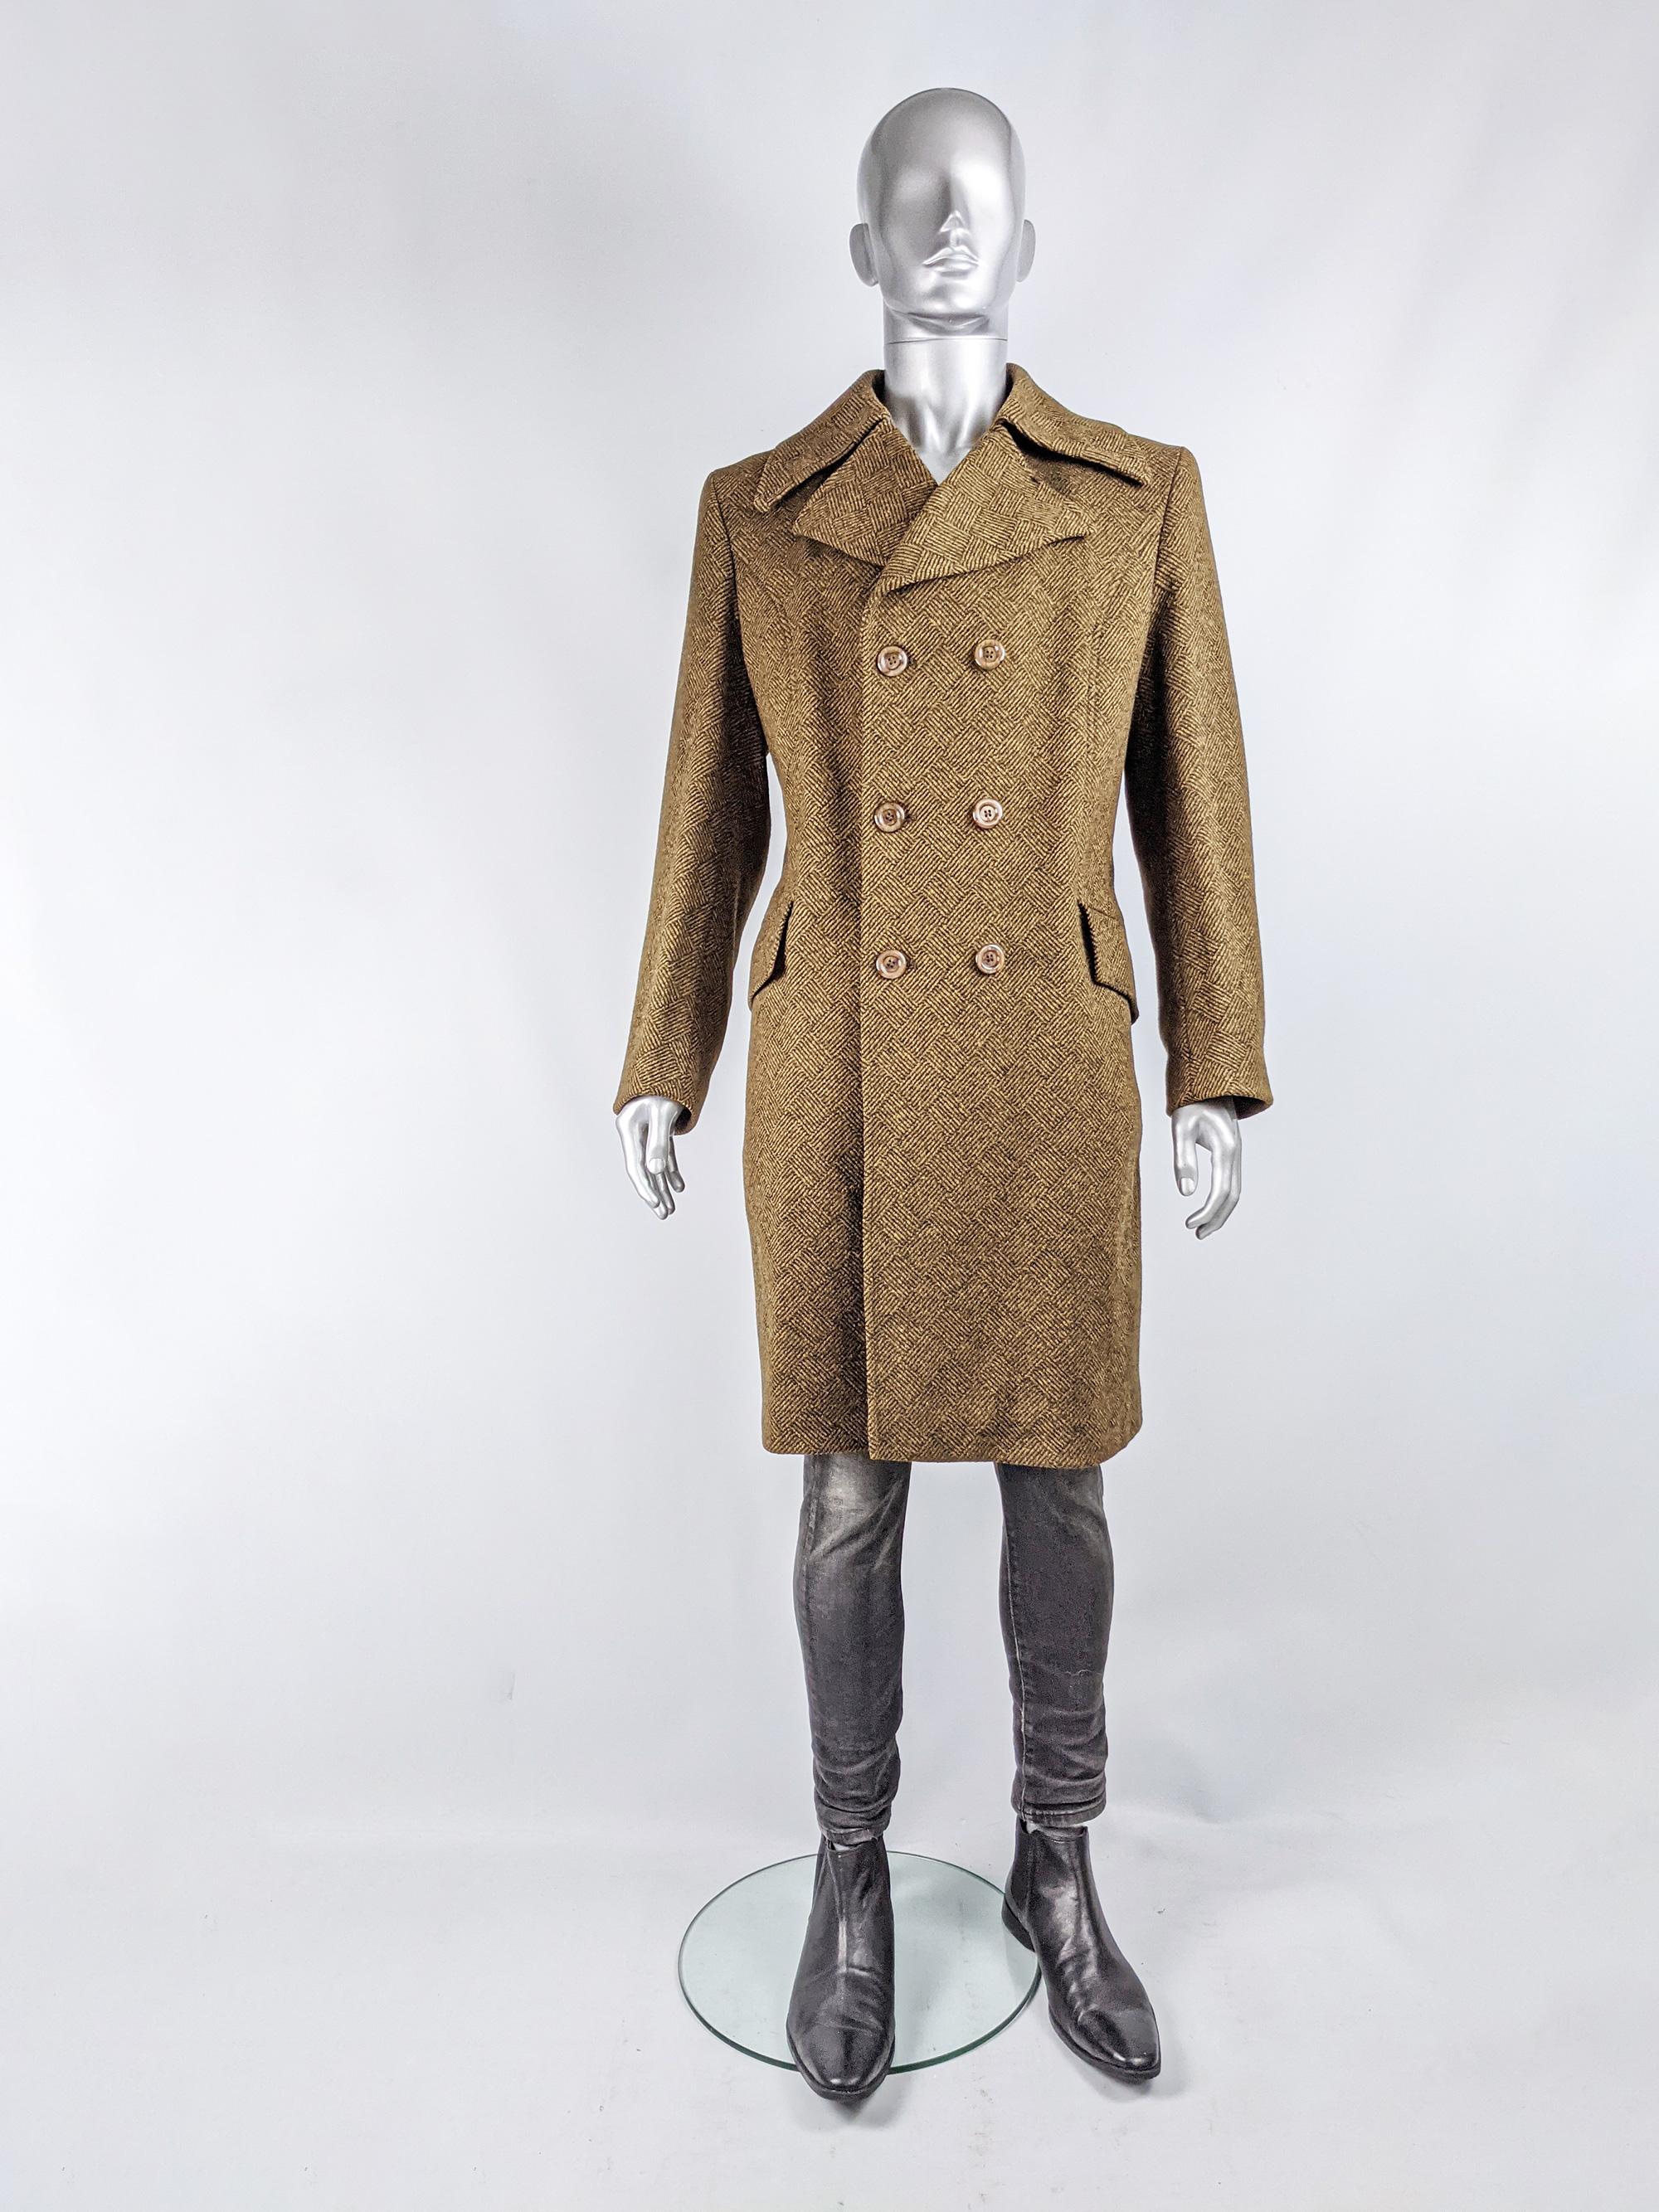 An excellent vintage mens long coat from the late 60s by White & Fuller. In a brown and black wool tweed with a large collar, tailored fit and double breasted buttons for a classic, Edwardian inspired look.

Size: Not indicated; fits like a men's